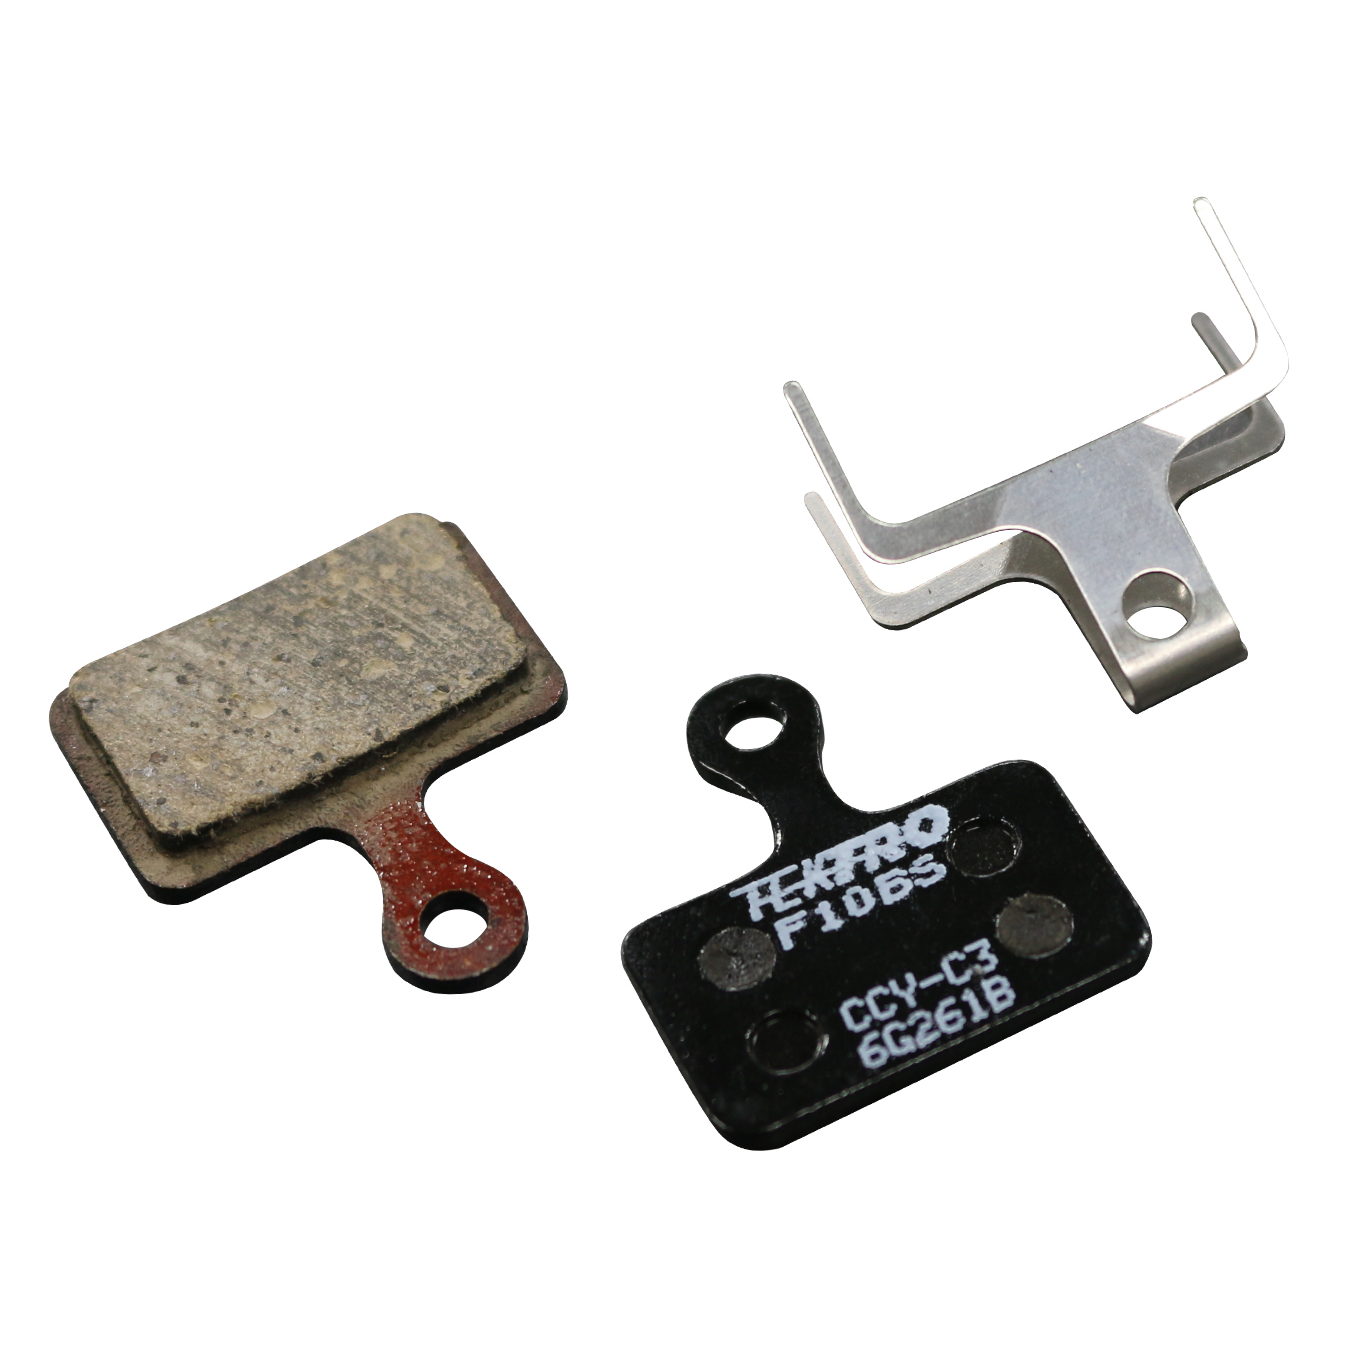 Picture of Tektro Disc Brake Pads for HD-R510 / HD-R310 - F10BS - metal/ceramic compound